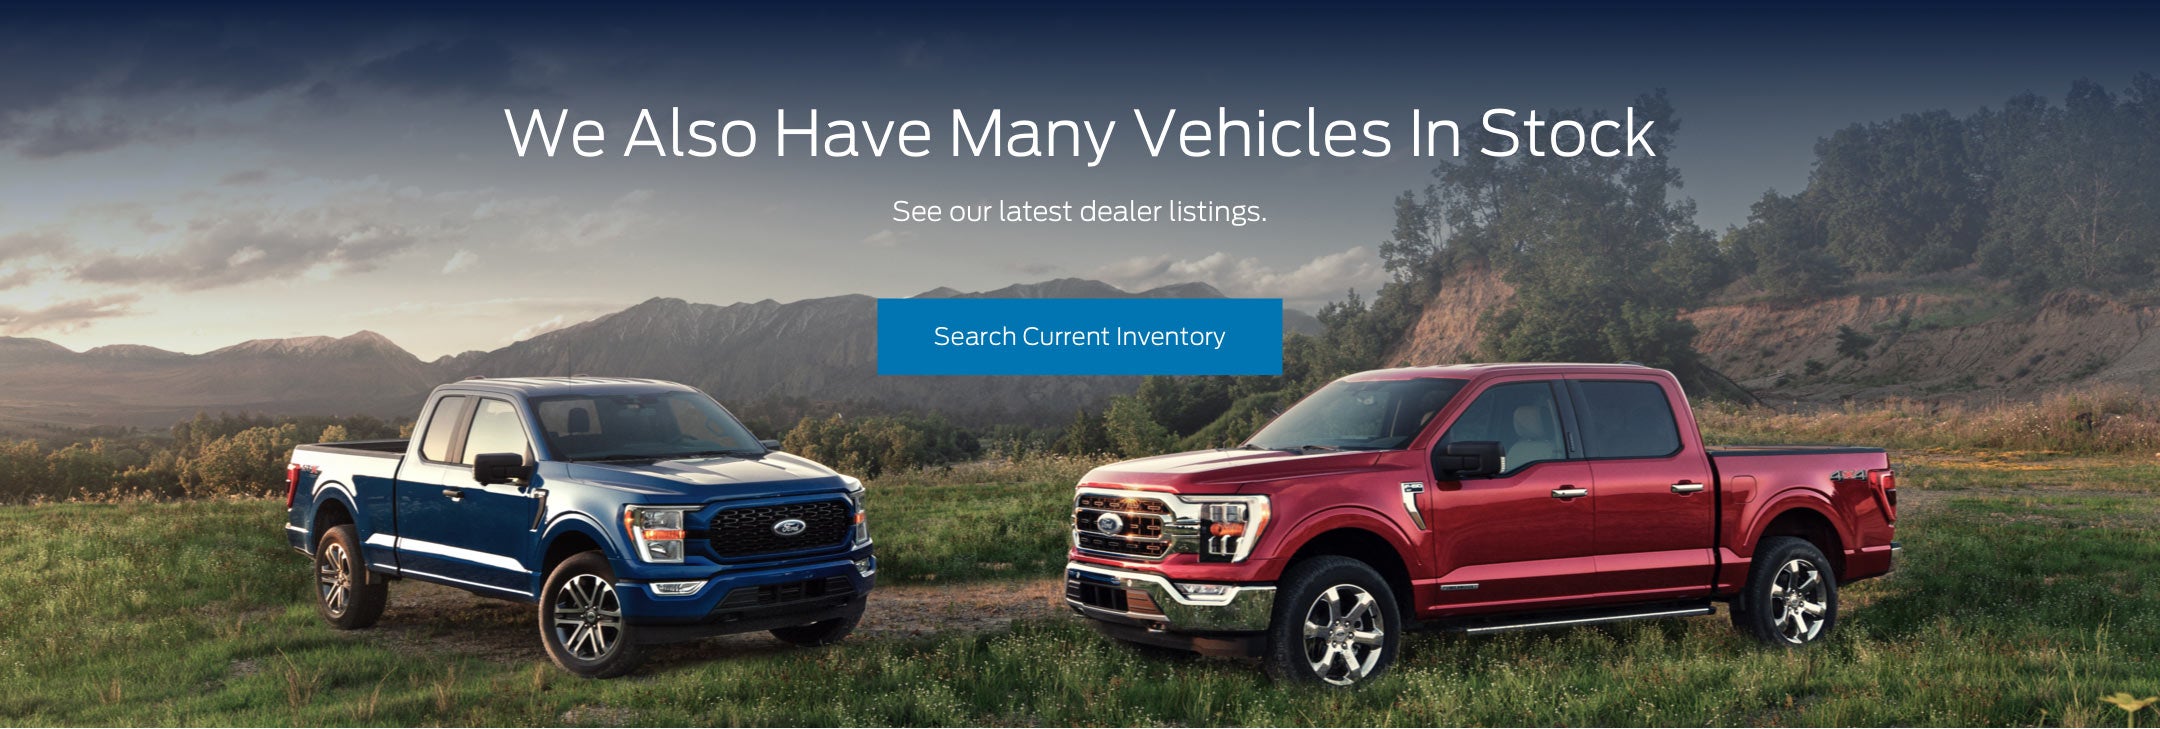 Ford vehicles in stock | Metro Ford Chicago in Chicago IL